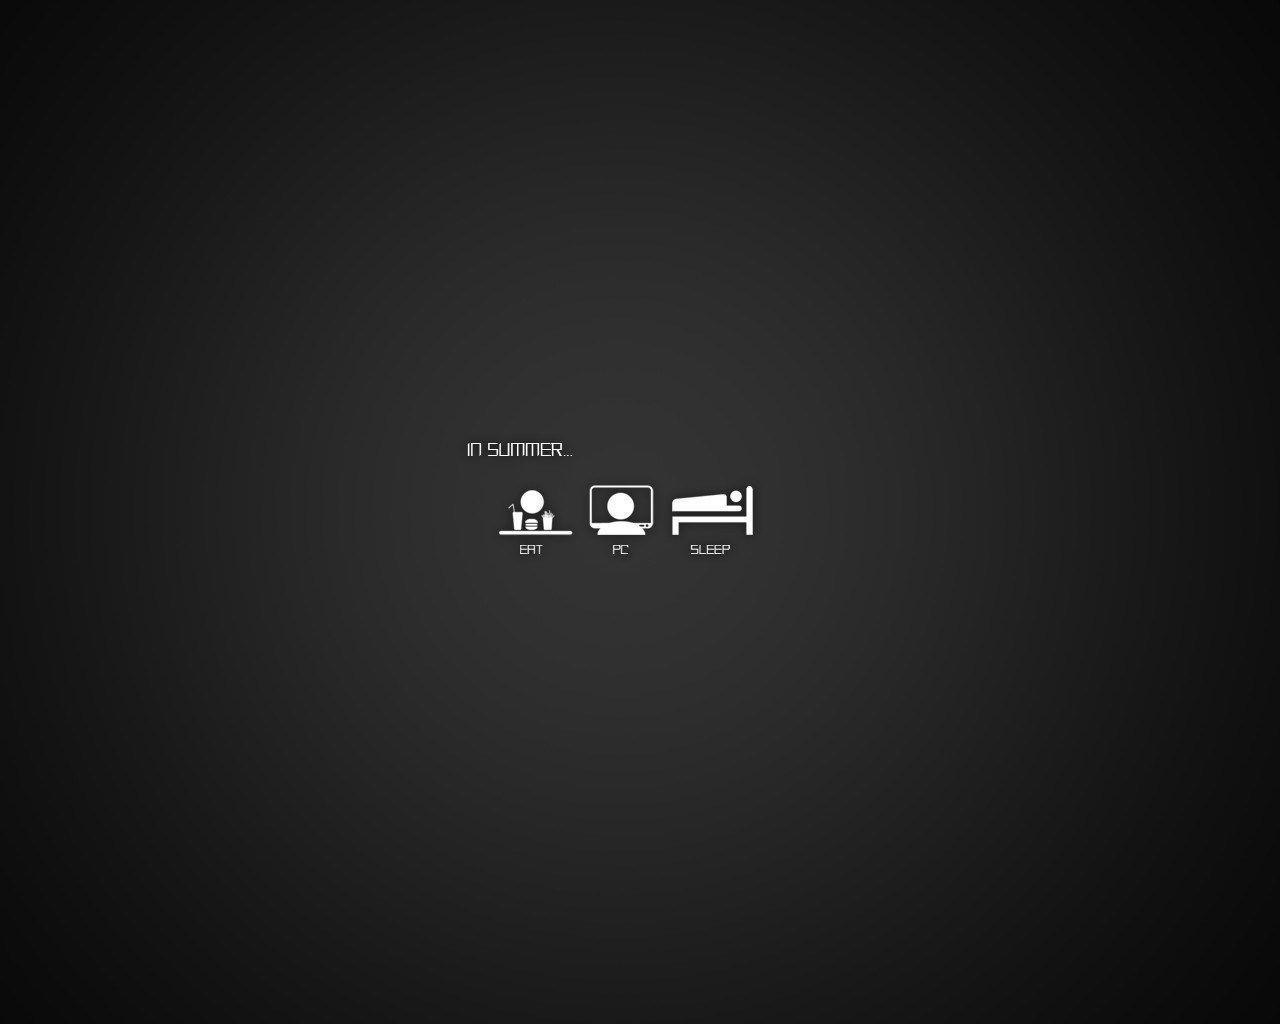 Awesome Geek Wallpaper For All Geeks & Nerds